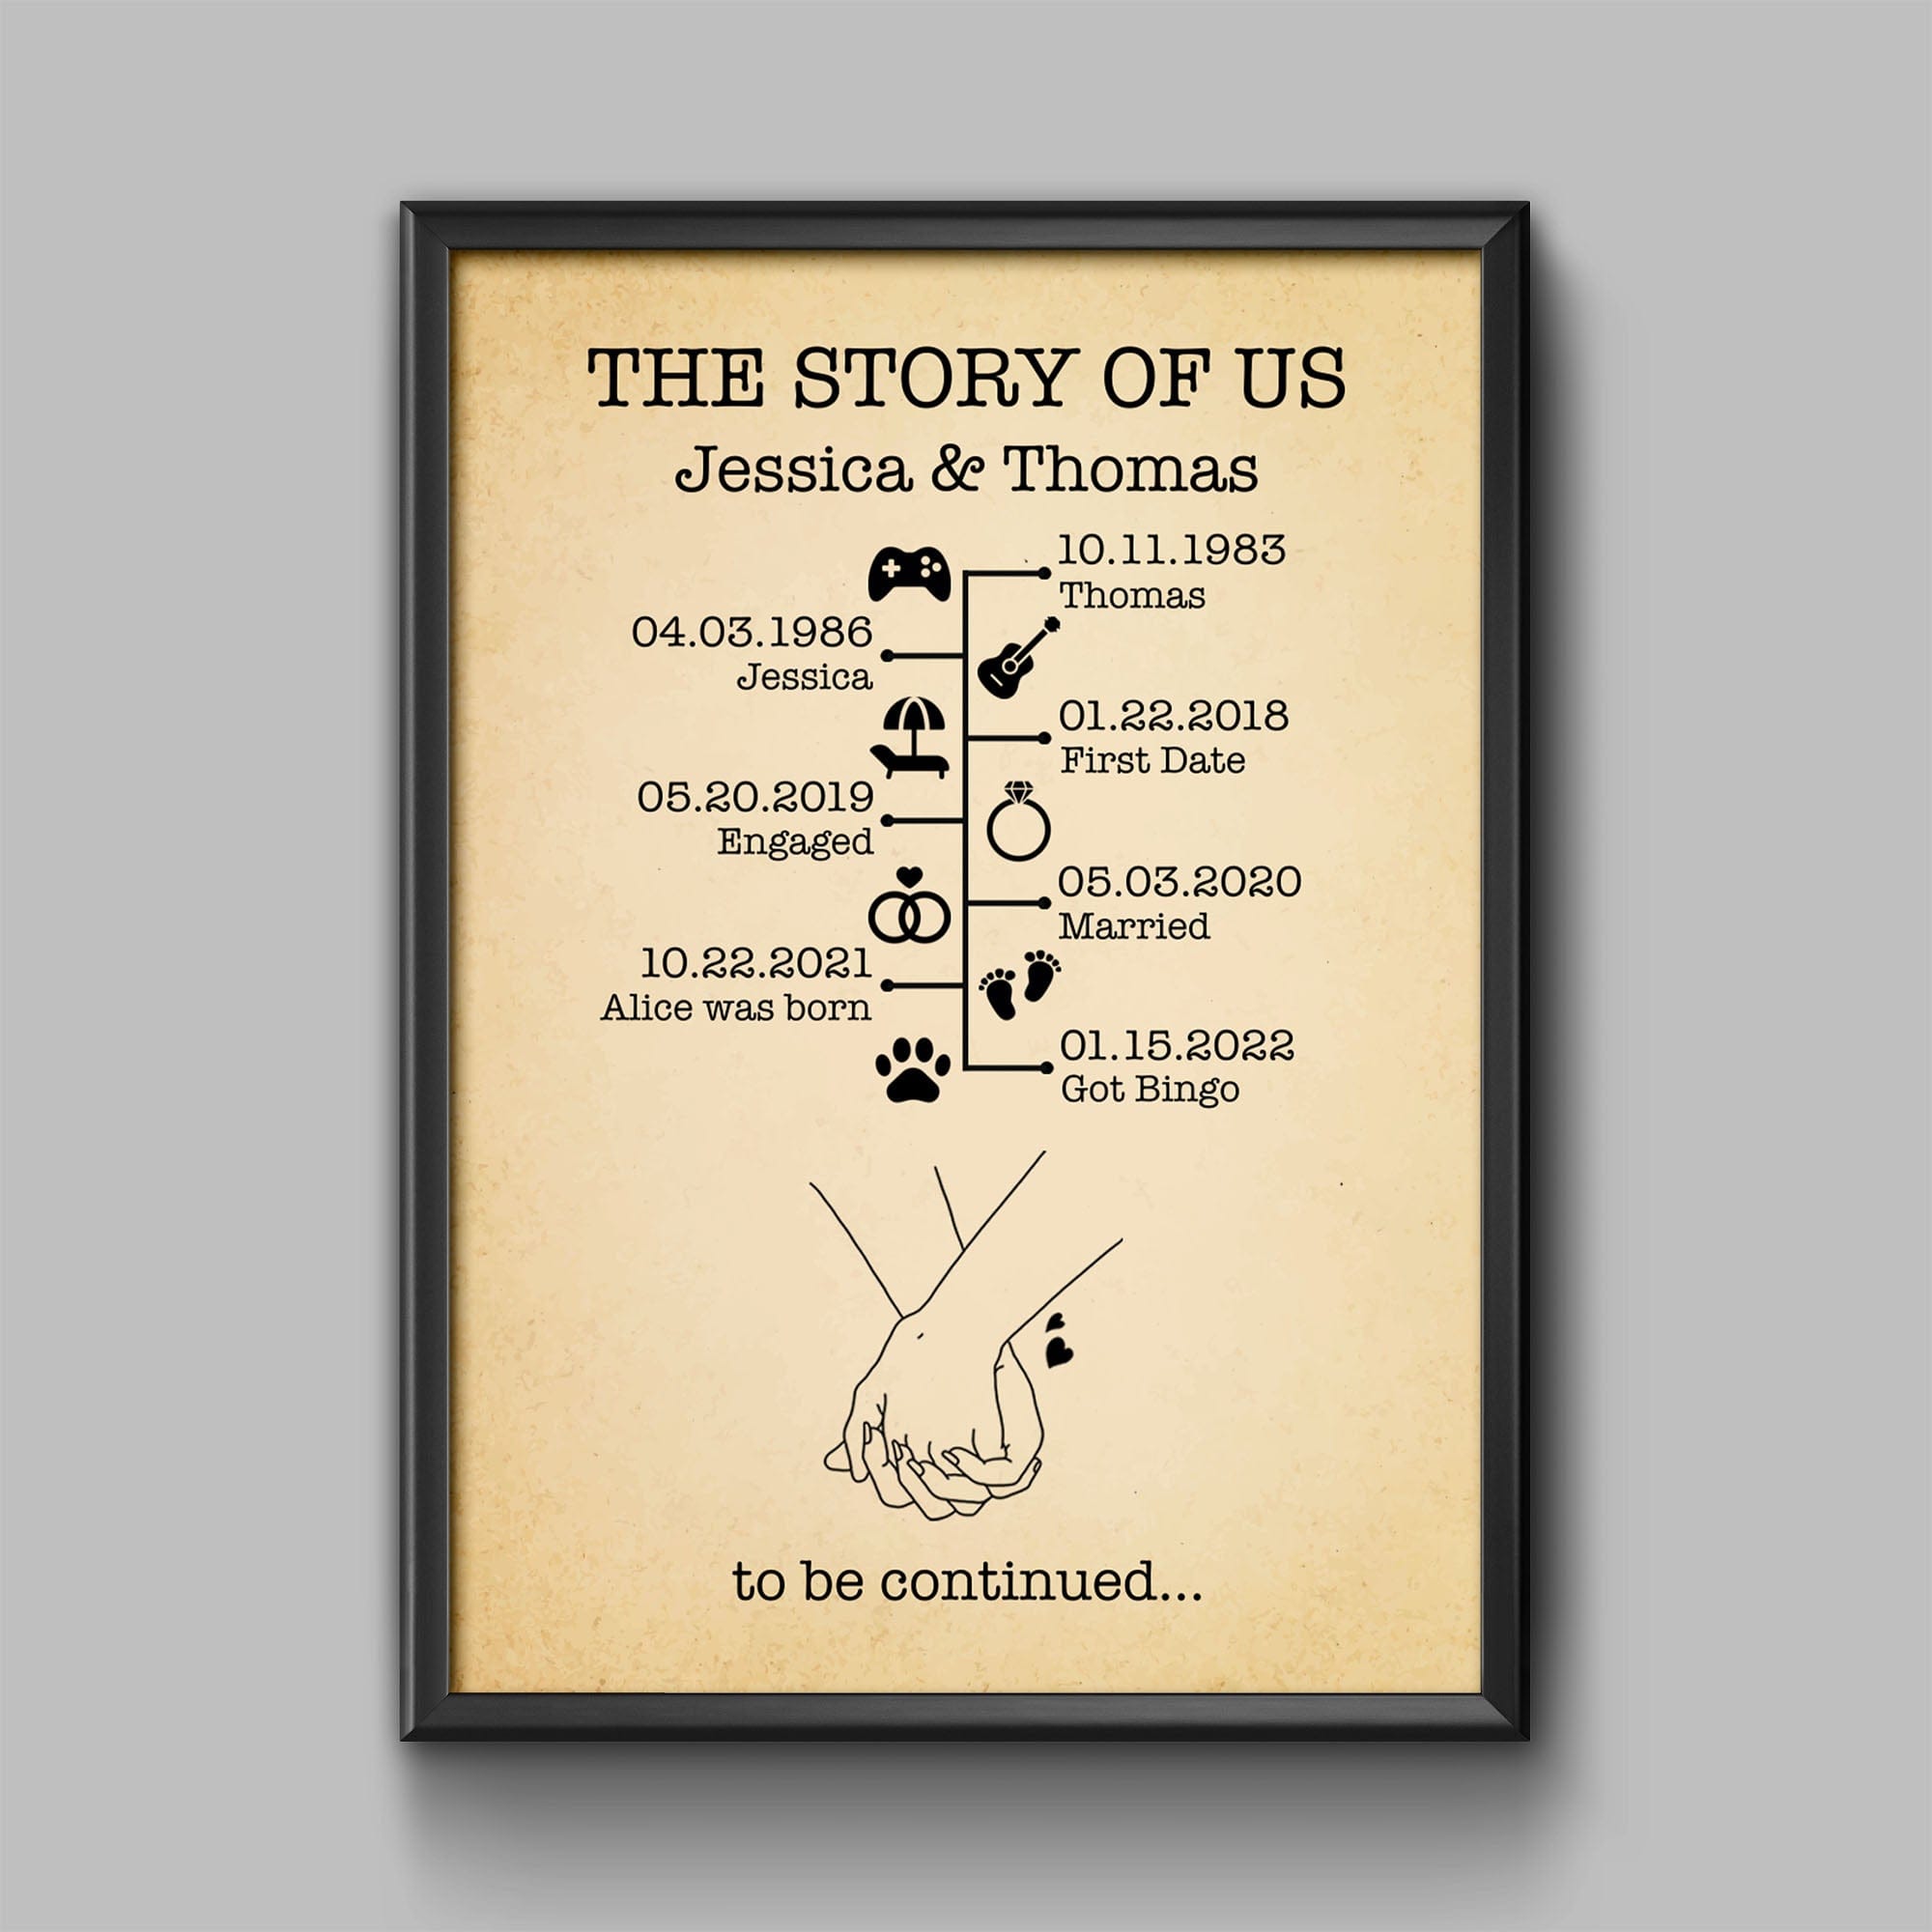 GeckoCustom The Story Of Us Timeline, Gift For Husband, Gift For Wife, Personalized Custom Anniversary Frame C366 8"x10"